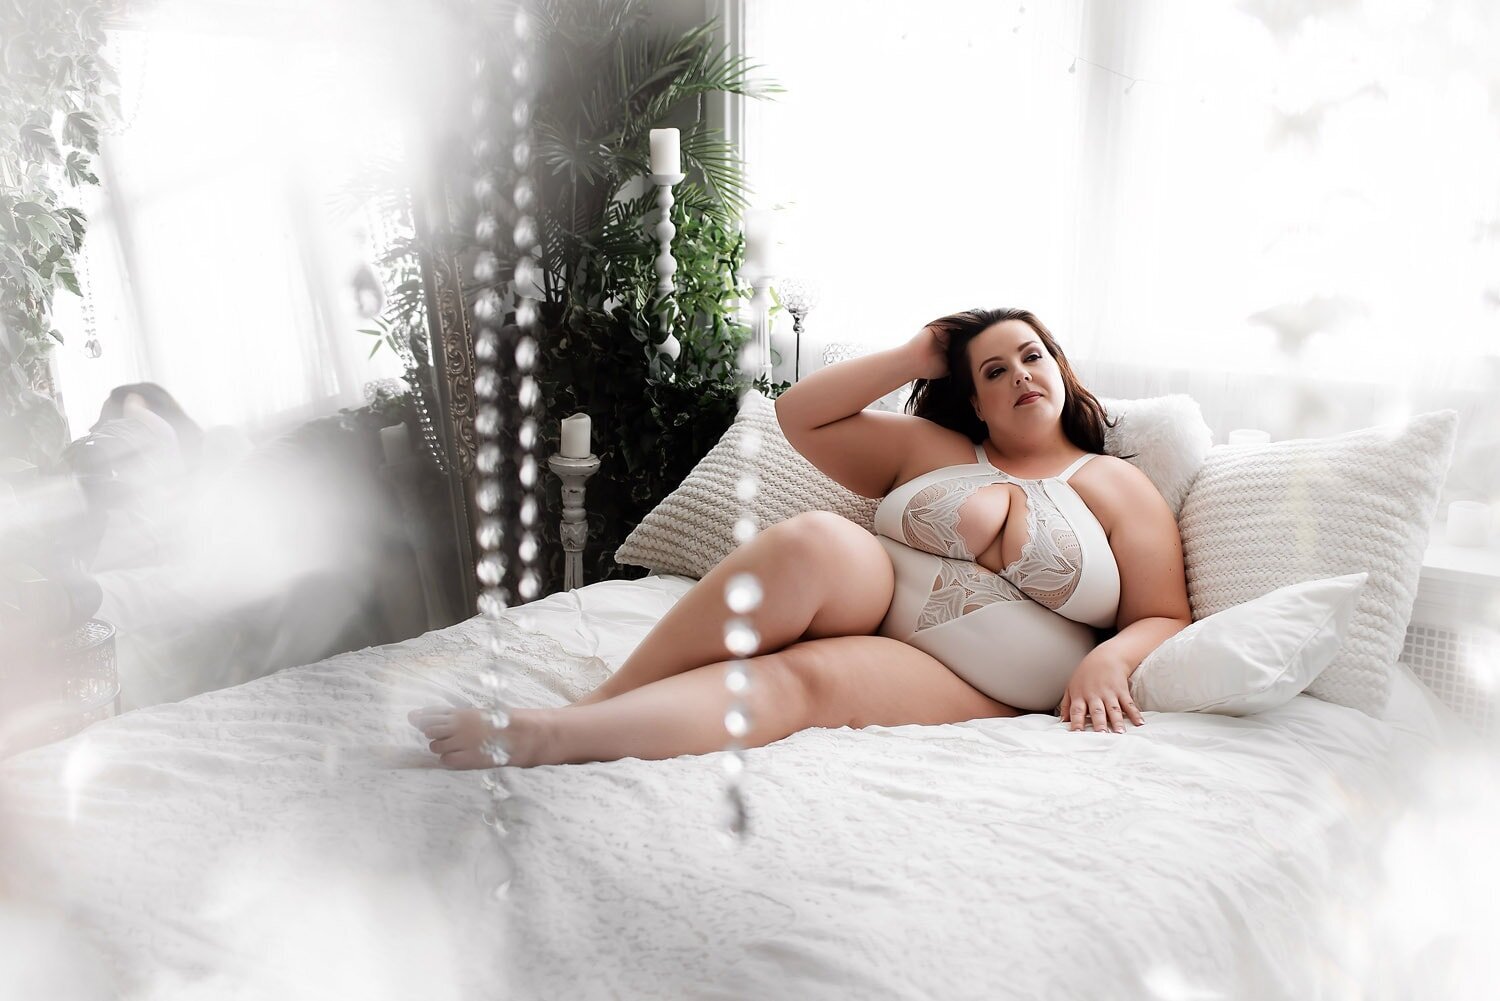 Light & Airy Studio Boudoir Photography in Downtown Vancouver